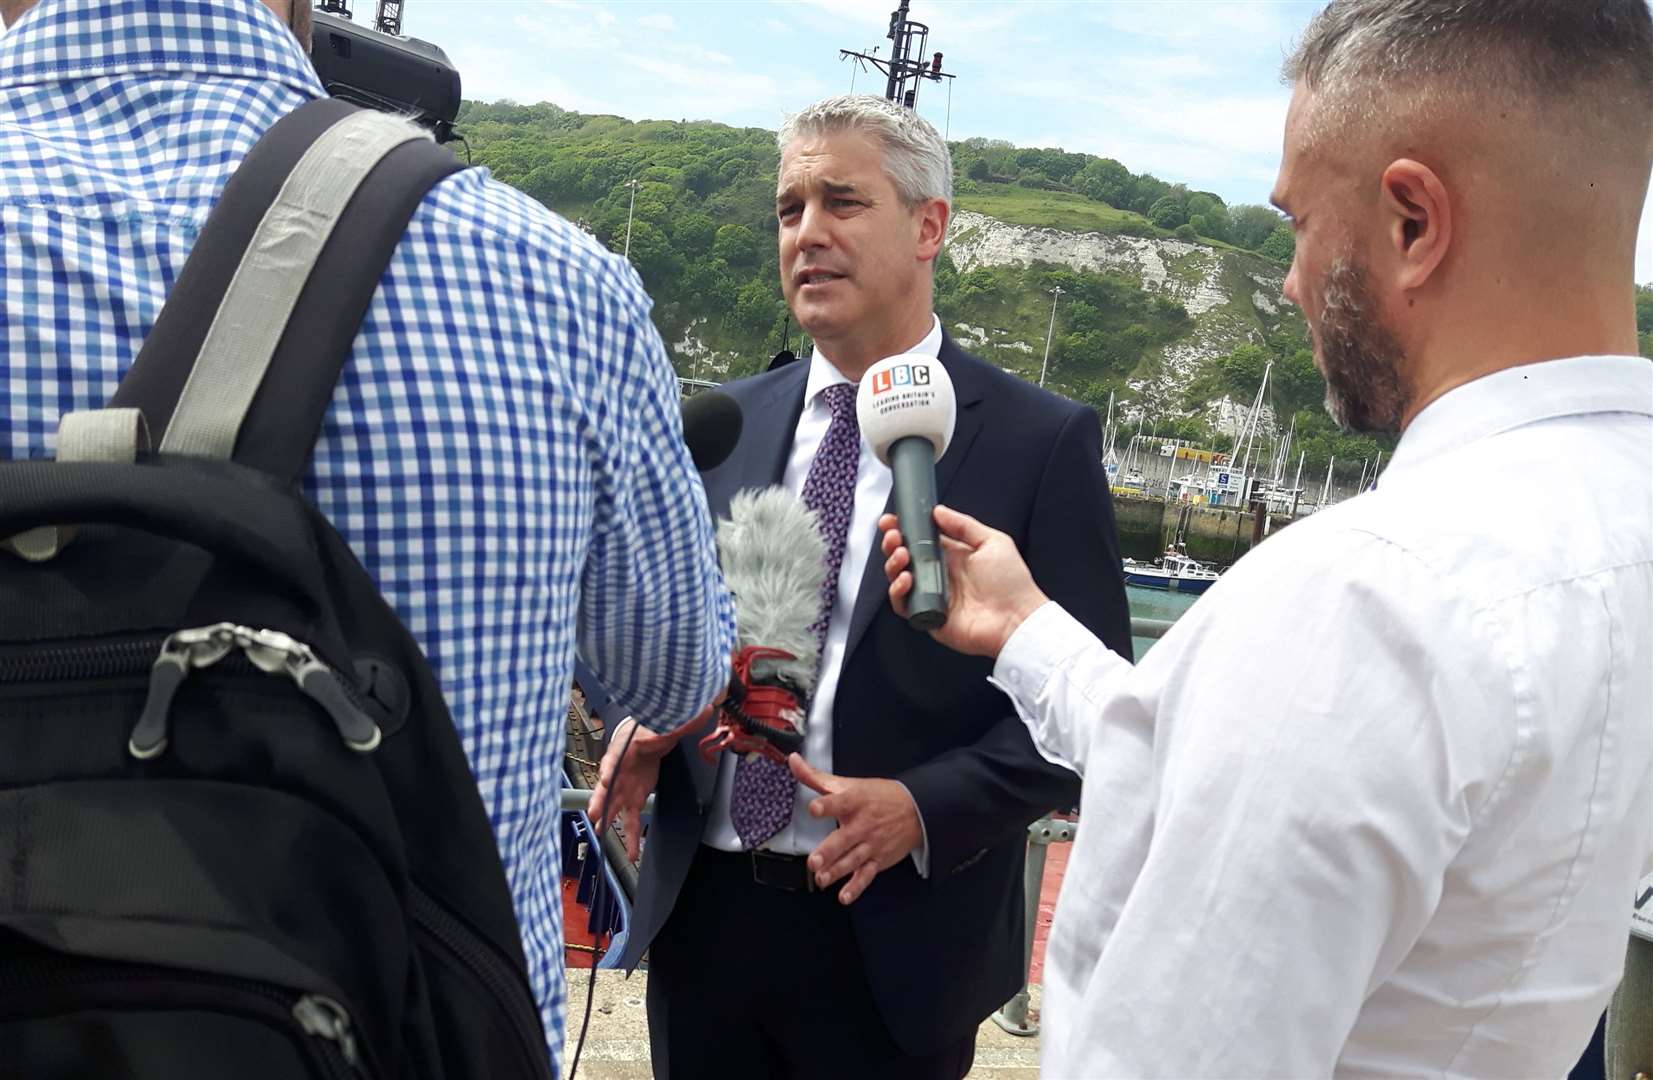 Brexit Minister Stephen Barclay during his visit to Kent